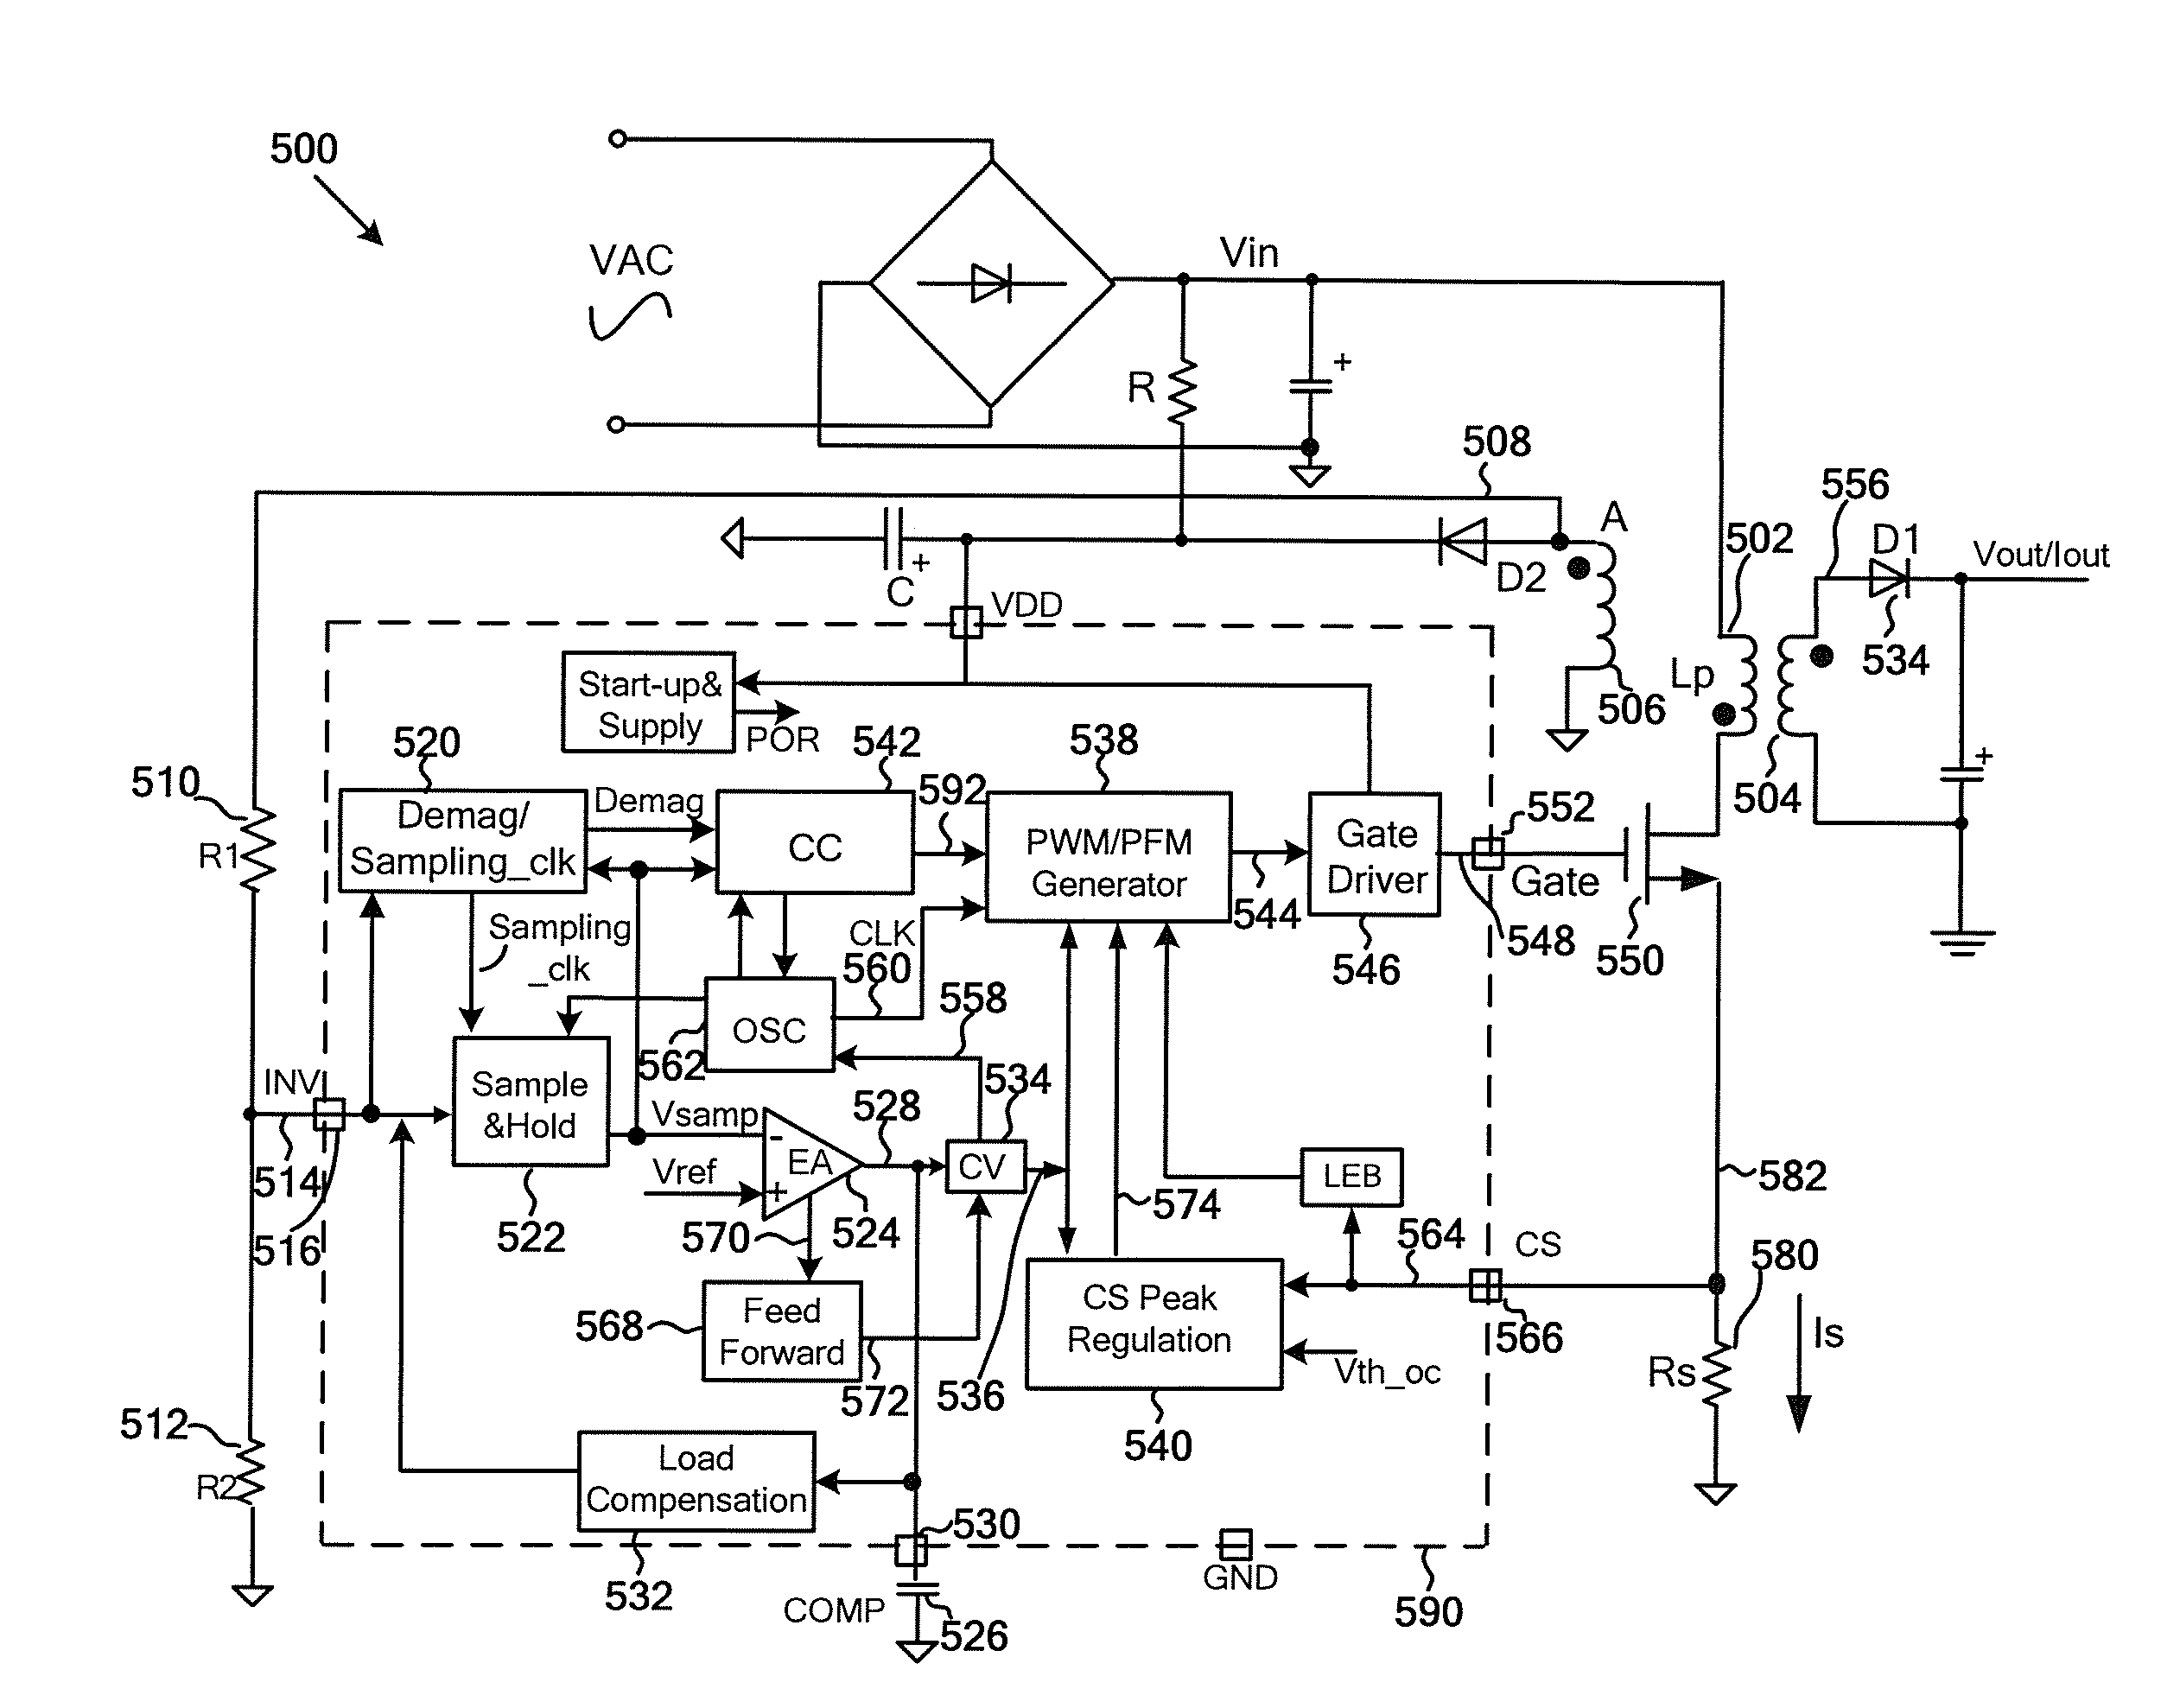 Systems and methods for constant voltage mode and constant current mode in flyback power converters with primary-side sensing and regulation